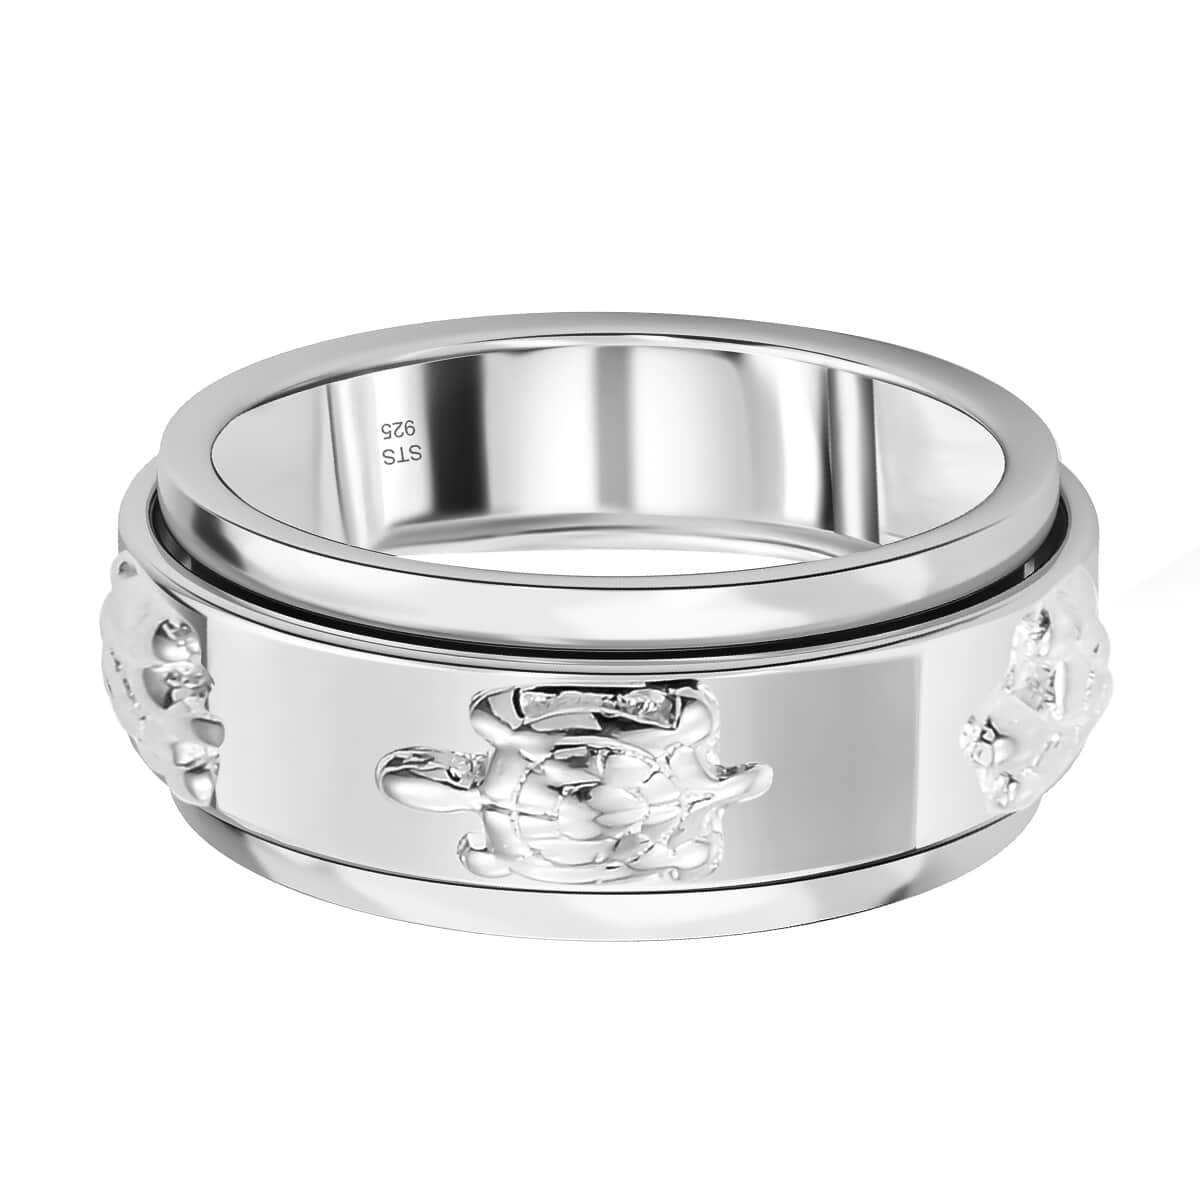 Sterling Silver Turtle Band Spinner Ring, Anxiety Ring for Women, Fidget Rings for Anxiety for Women, Stress Relieving Anxiety Ring, Promise Rings (Size 8.0) (5 g) image number 6